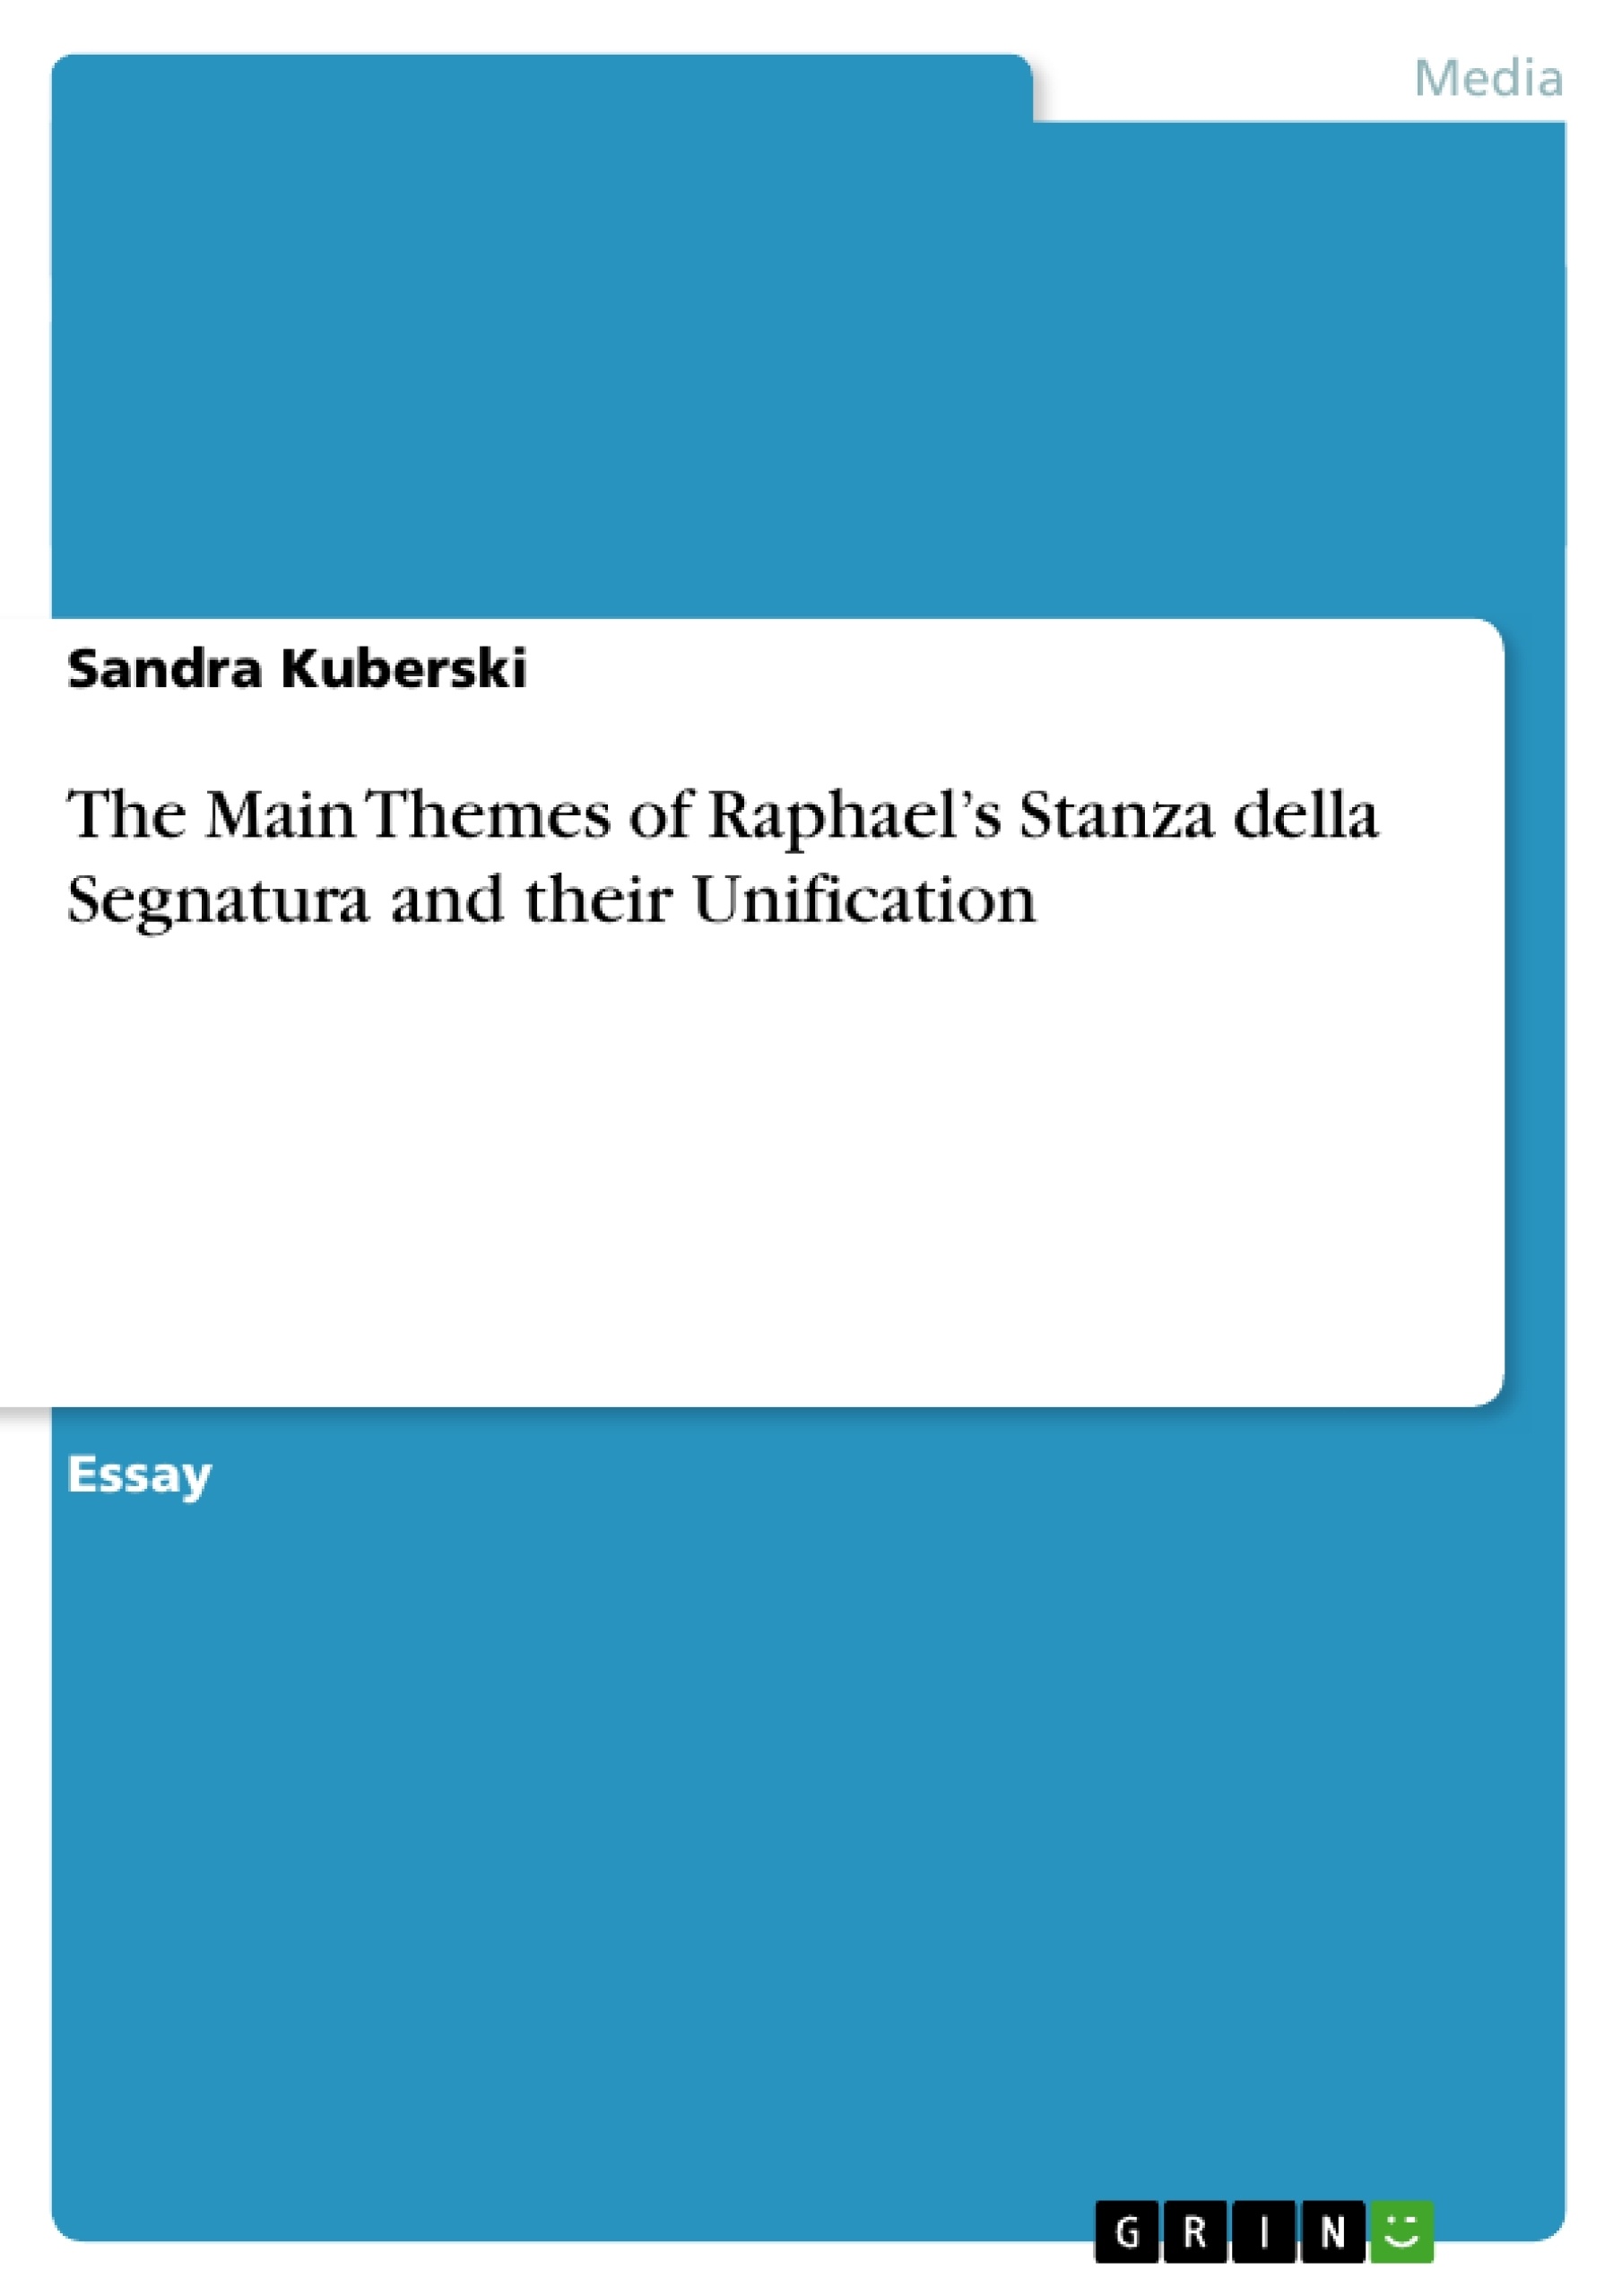 Título: The Main Themes of Raphael’s Stanza della Segnatura and their Unification